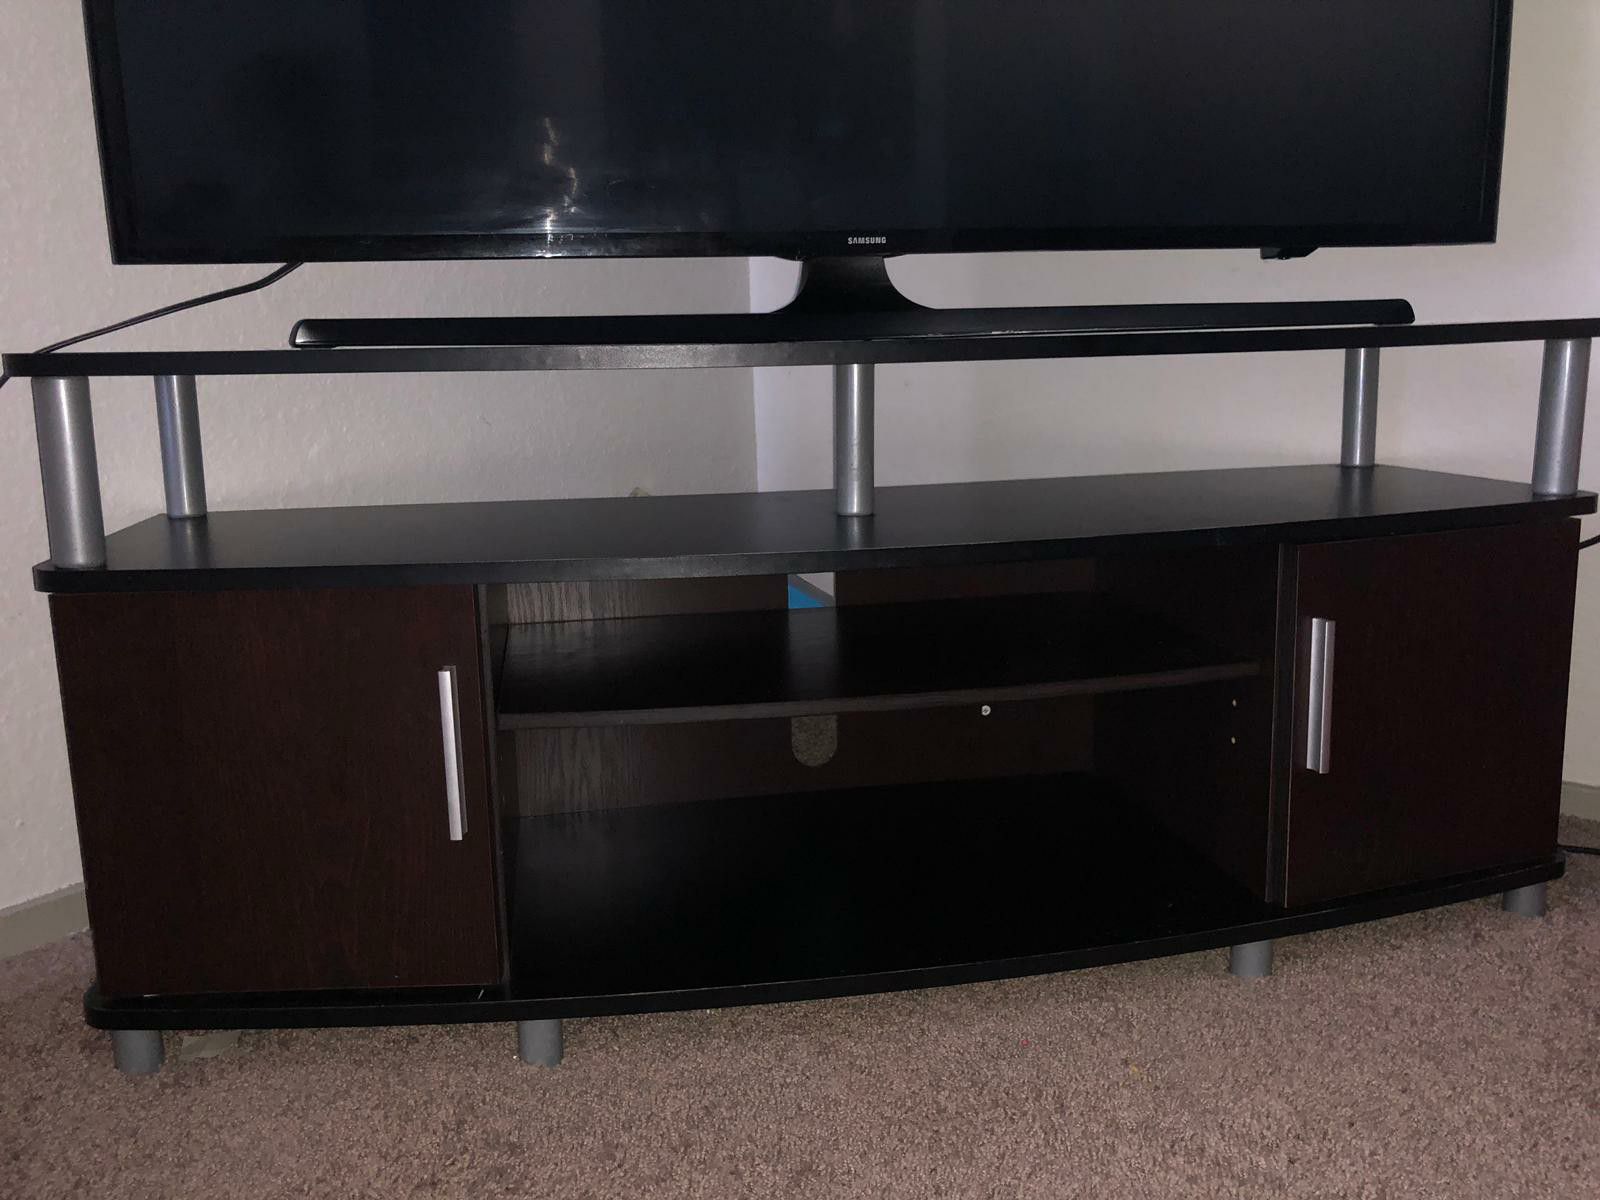 Samsung 48 inch led smart HDTV and Tv stand